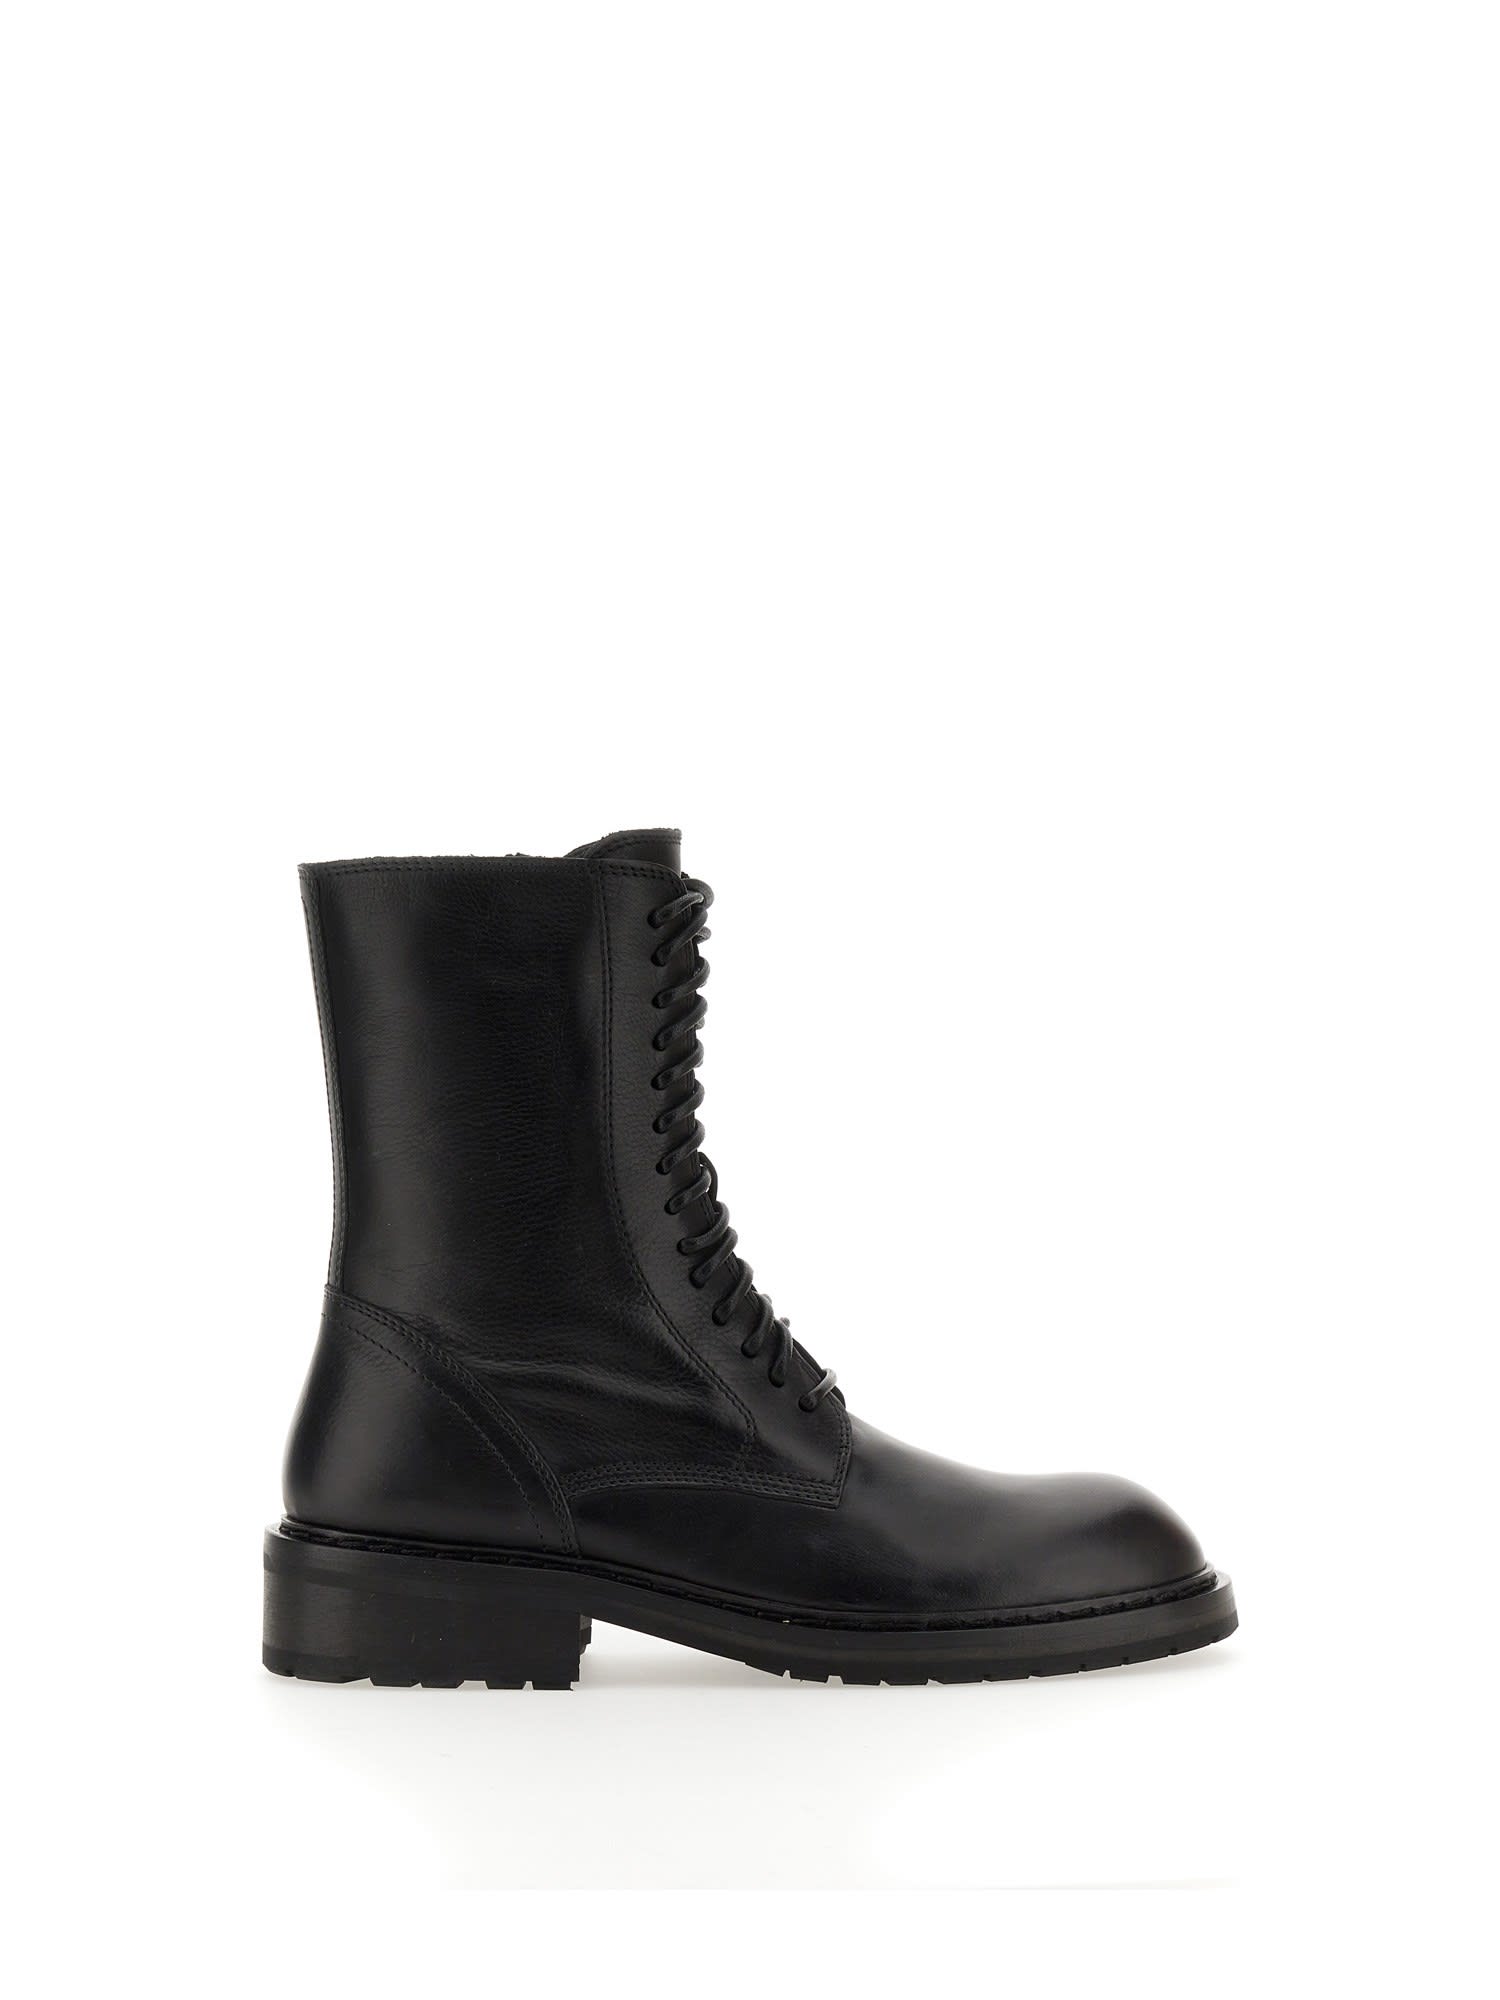 ANN DEMEULEMEESTER LEATHER LACE-UP BOOT